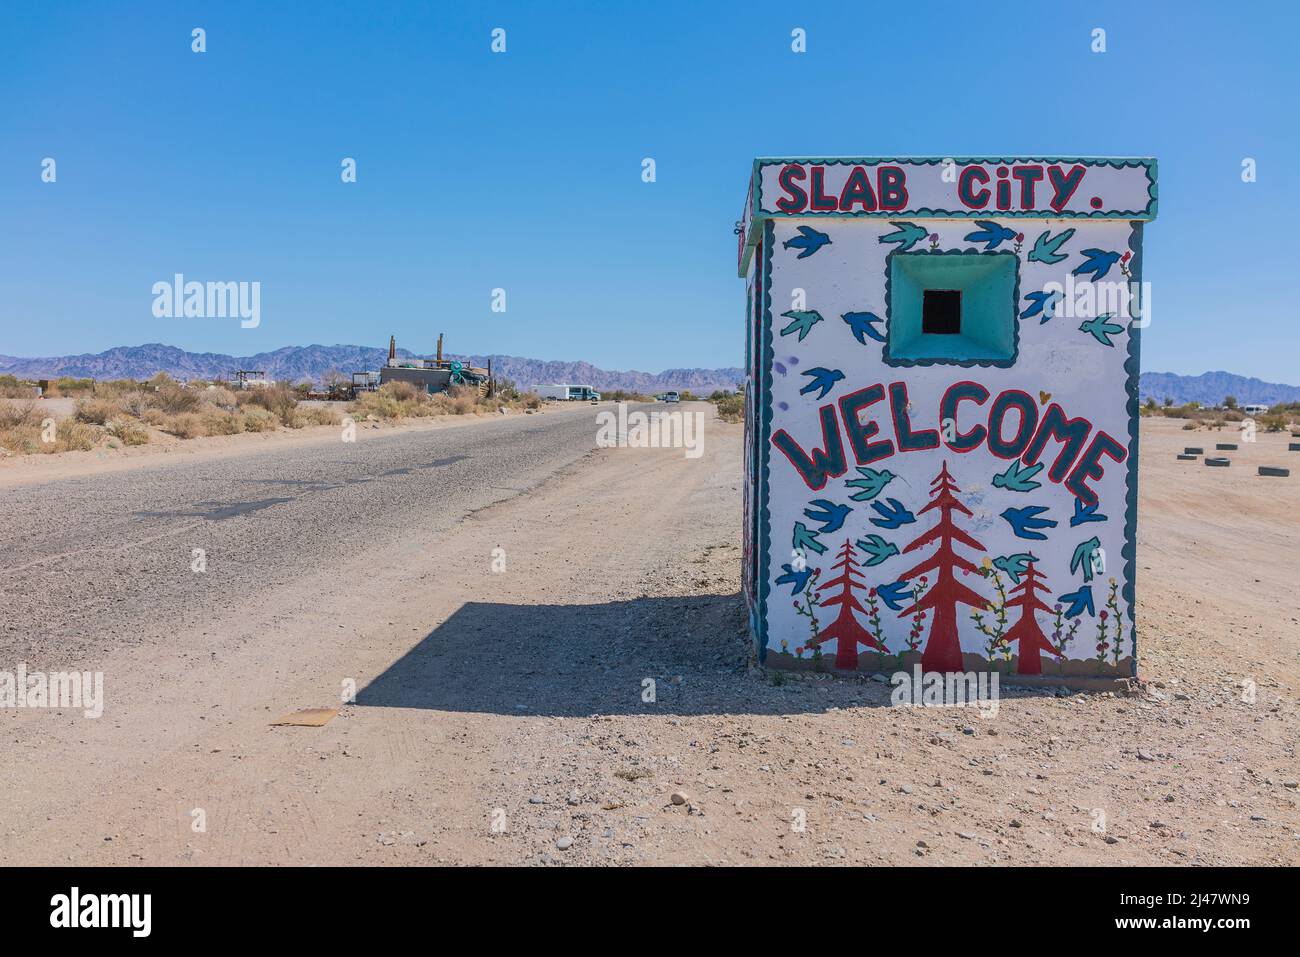 A tiny building with a mural painted on it welcoming visitors to Slab City. It is an off-the-grid community with no municipal services. It gets it nam Stock Photo